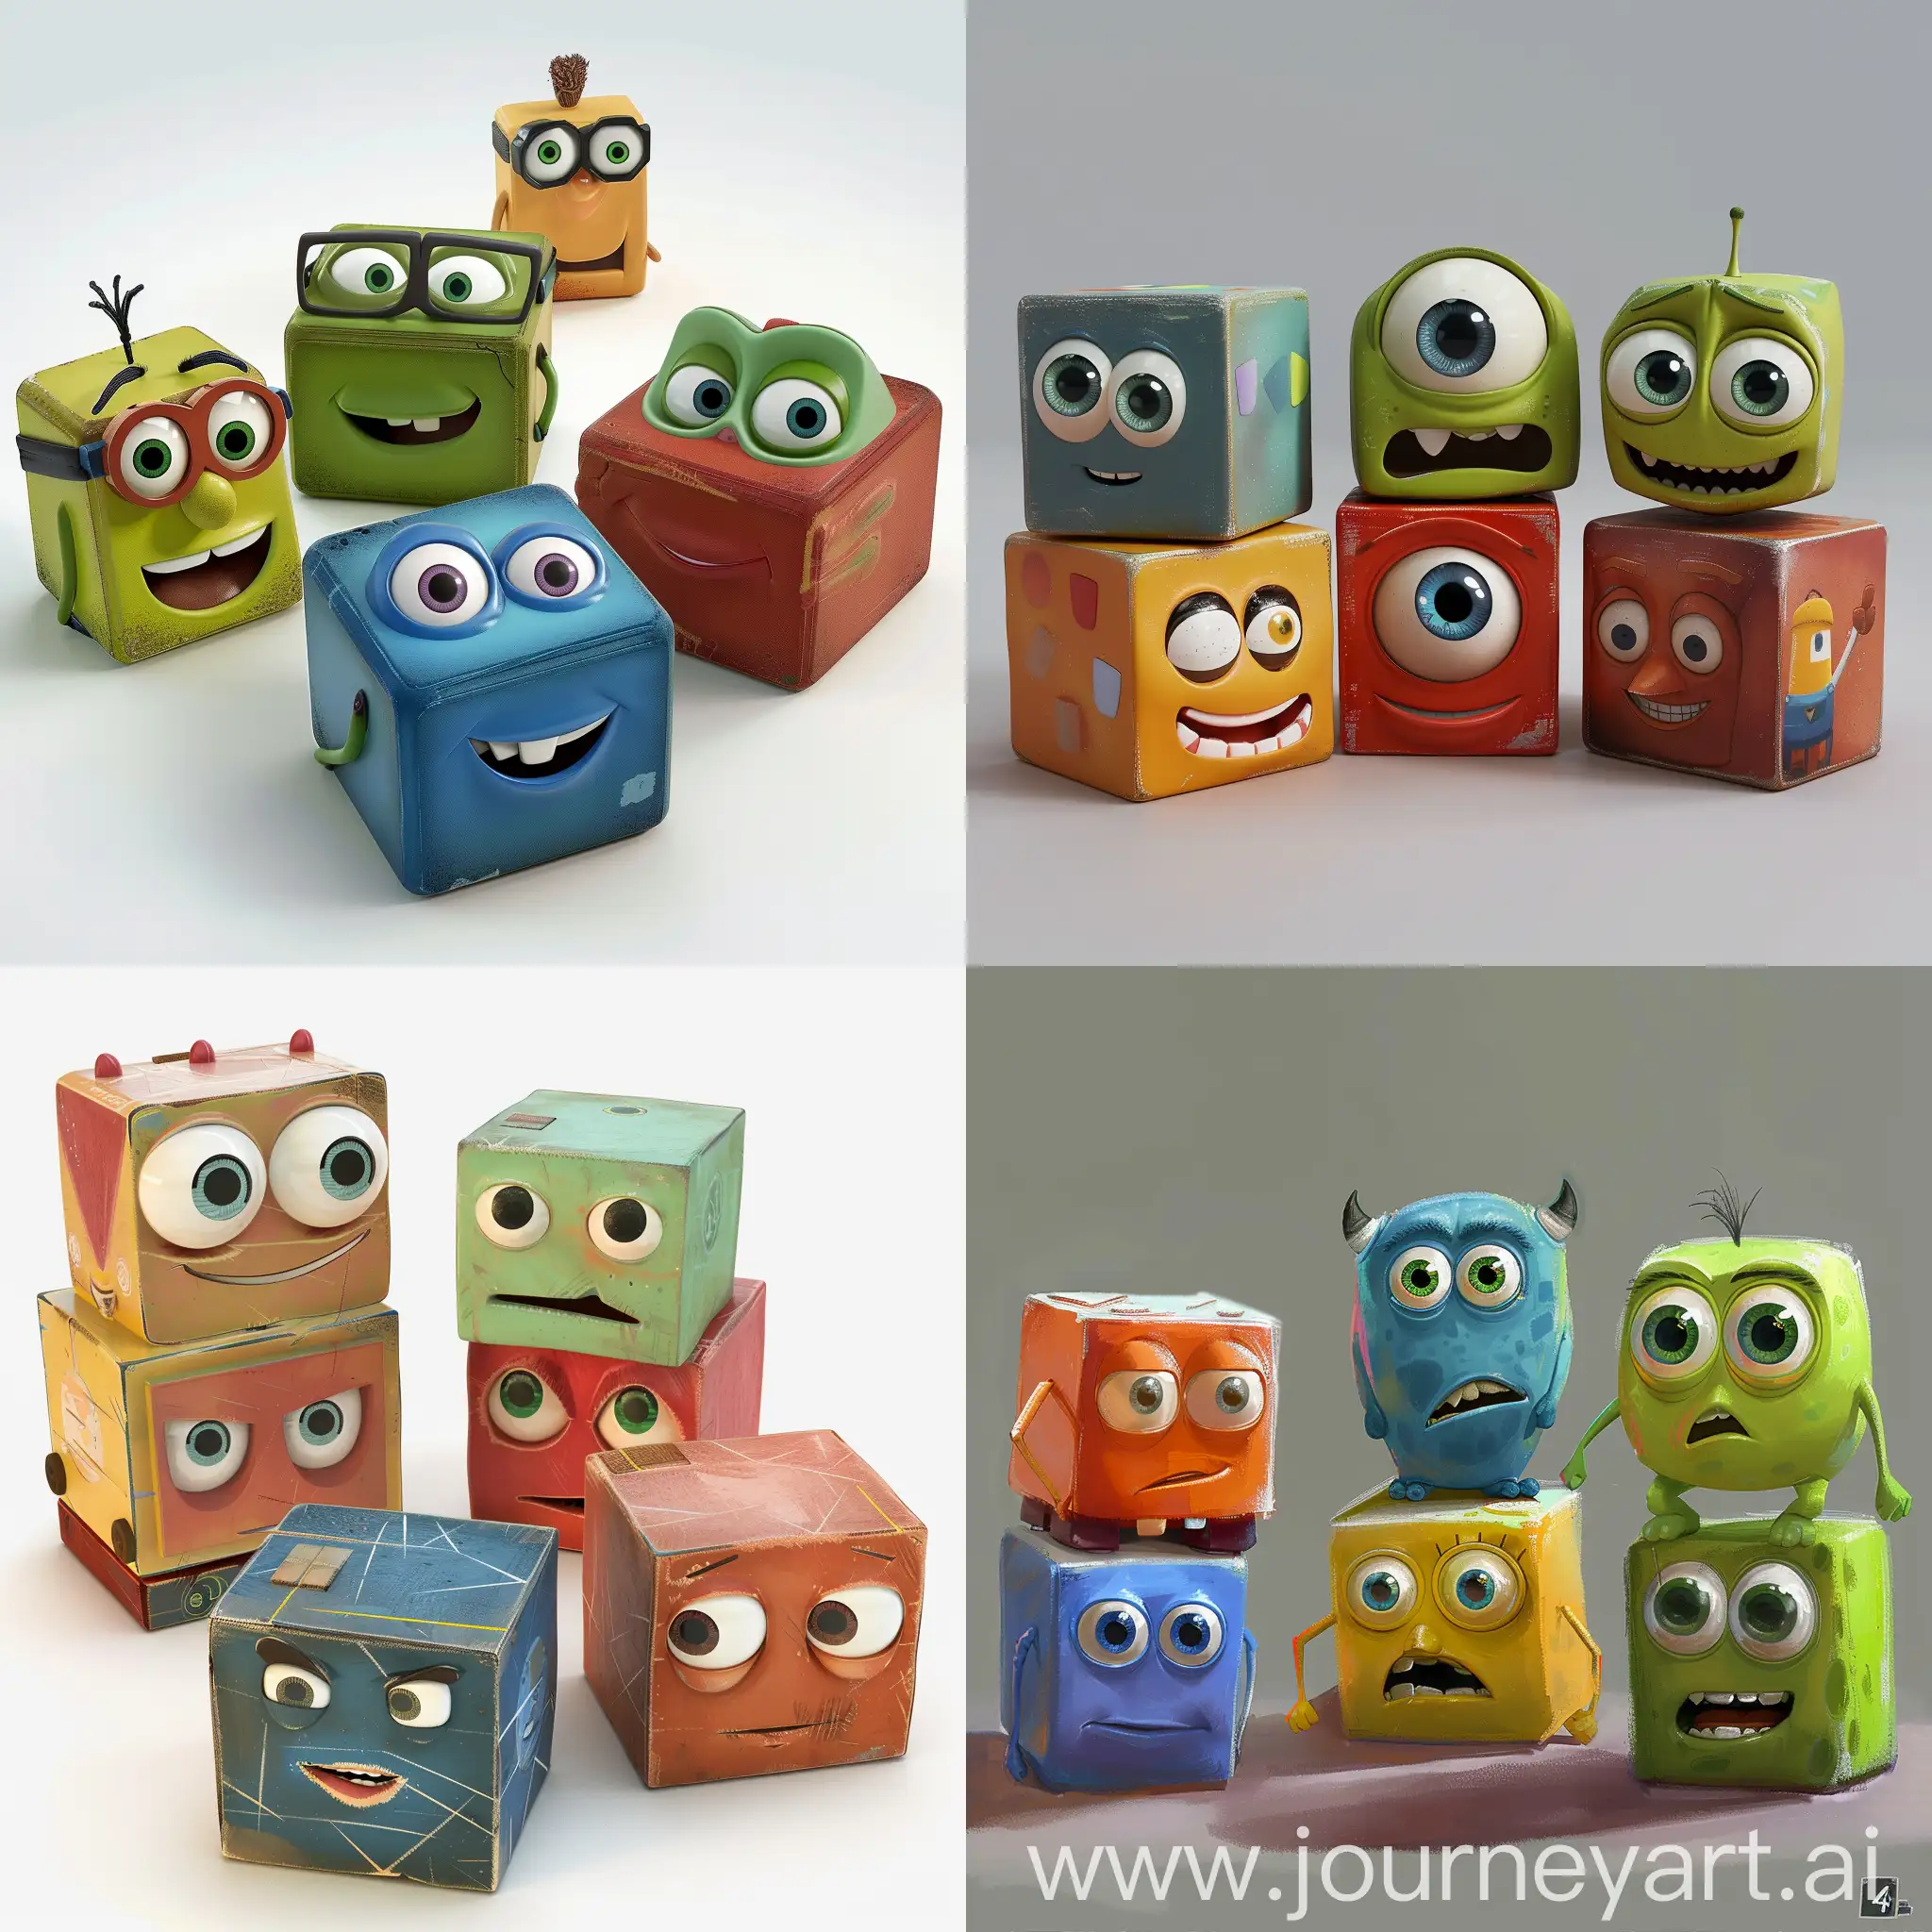 Festive-PixarStyle-Cube-Characters-for-July-4th-Celebration